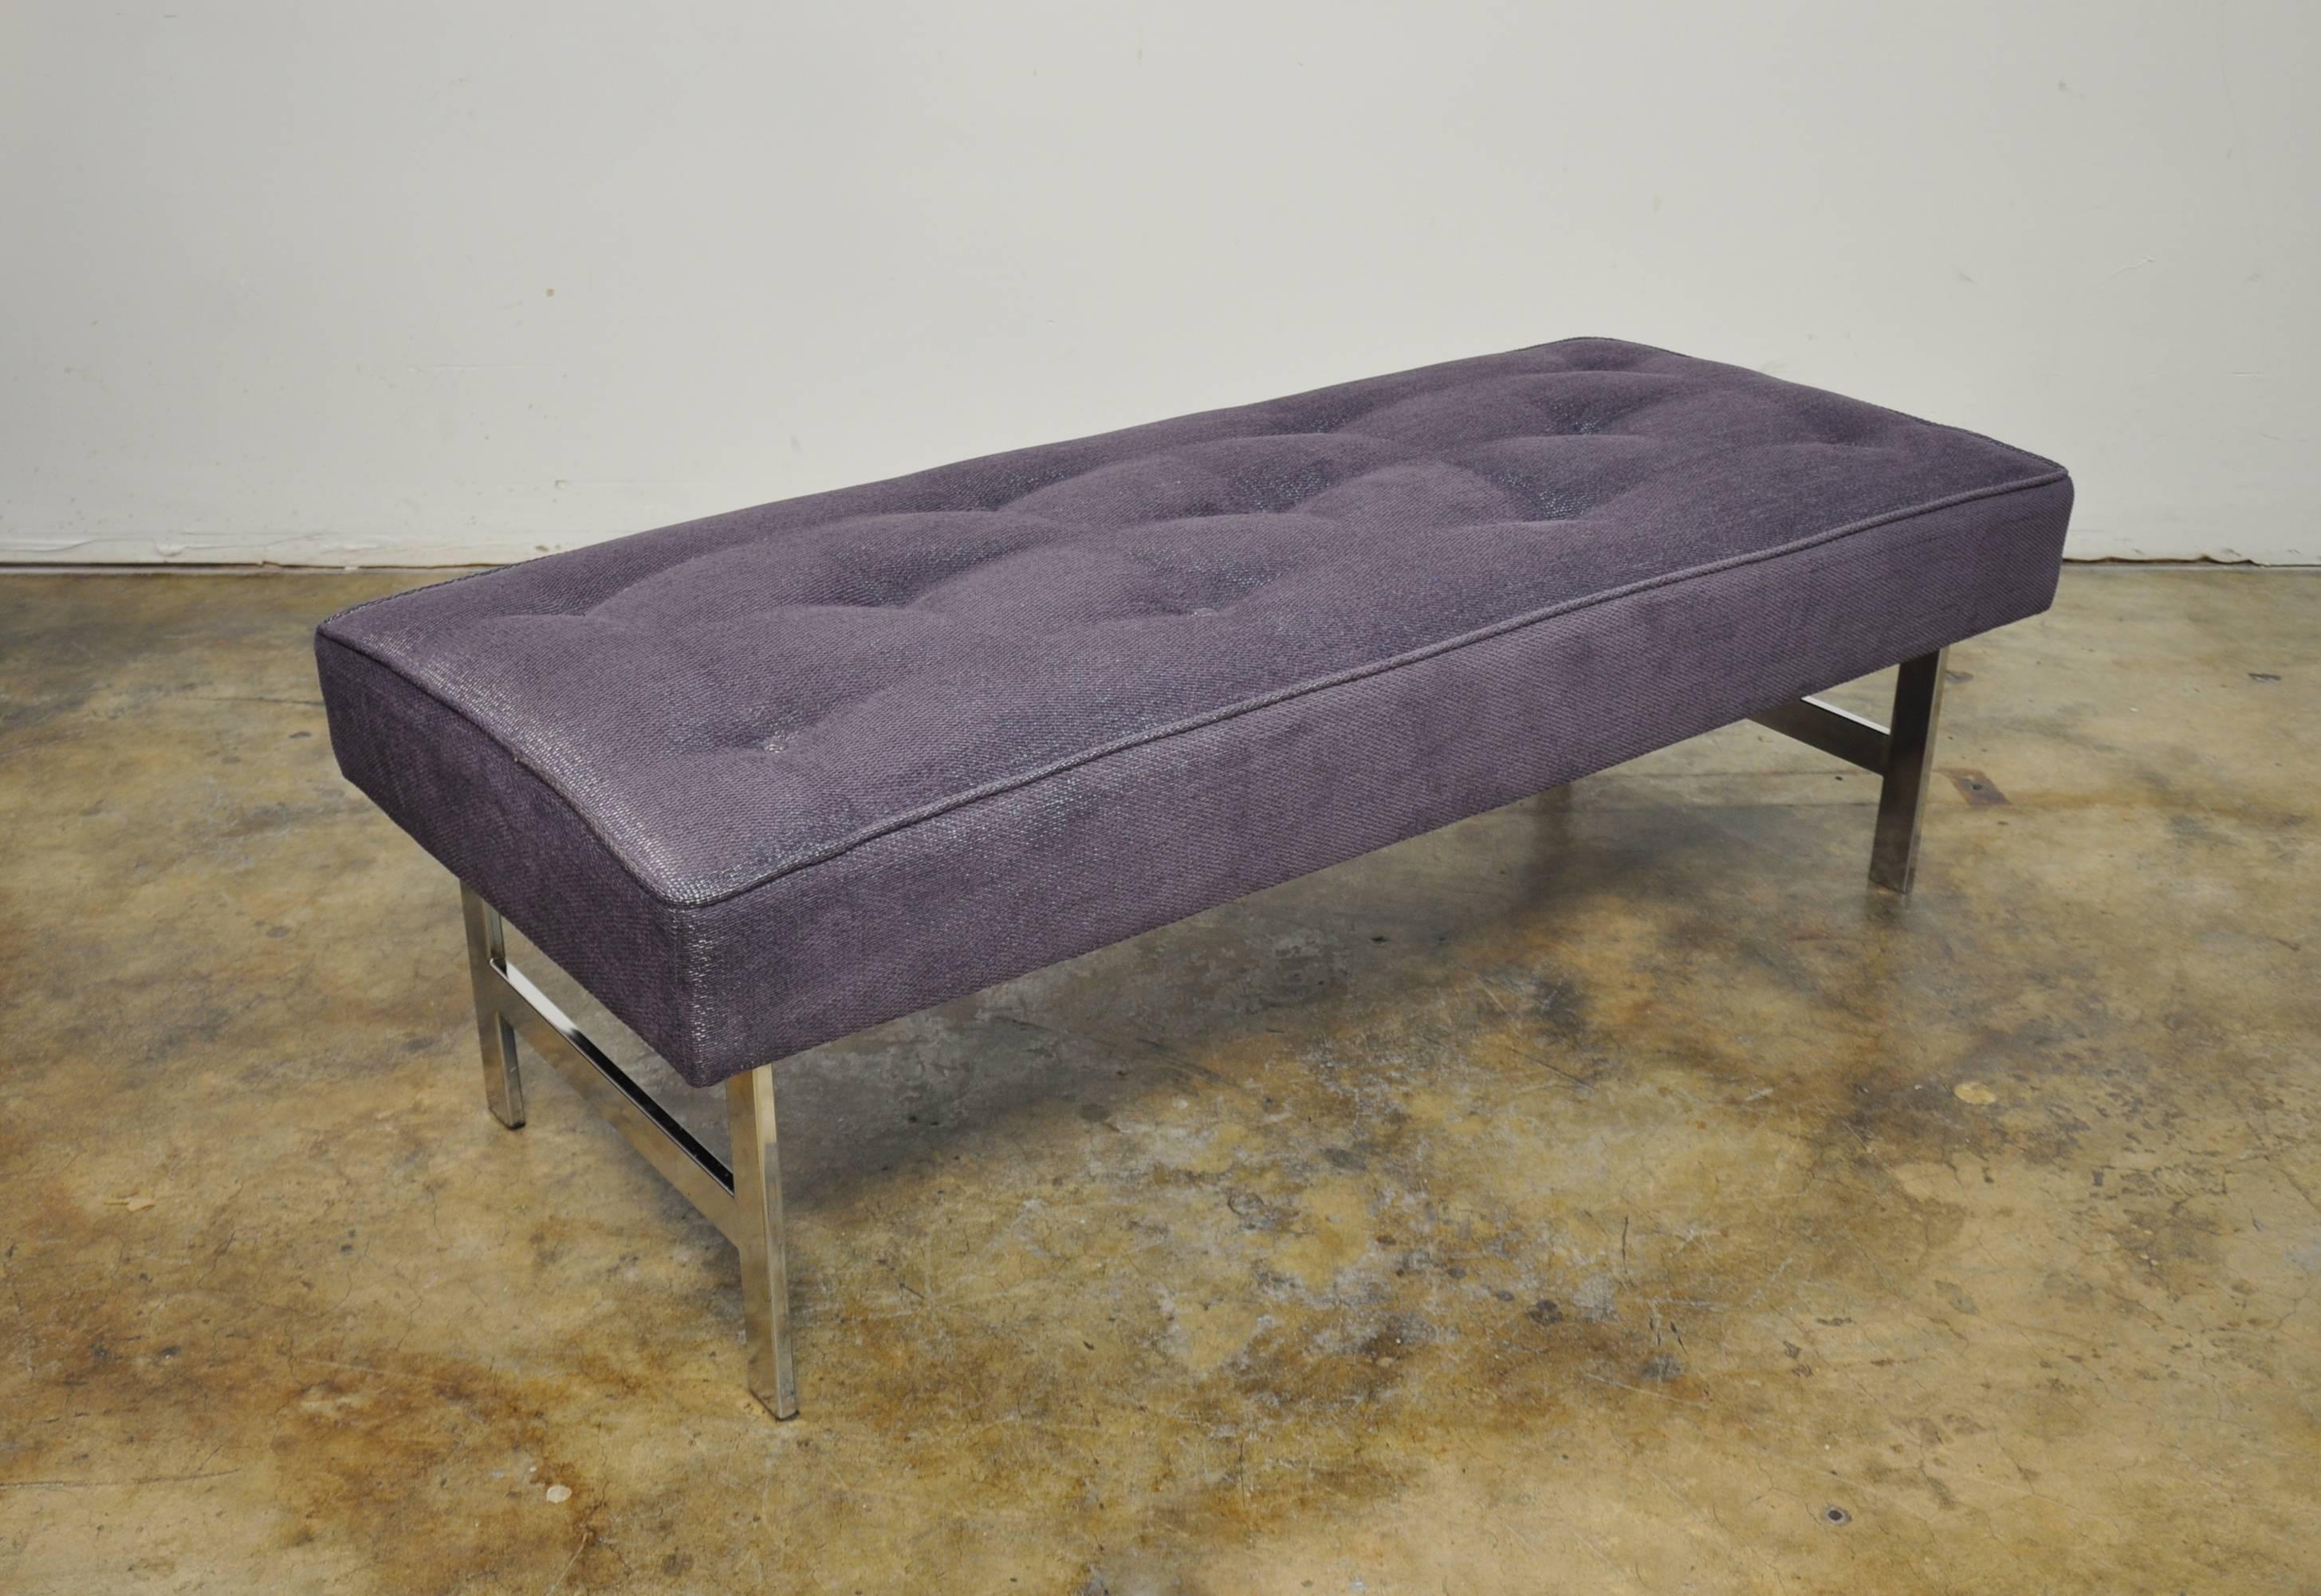 Late 20th Century Mid-Century Modern Milo Baughman Style Chrome Upholstered Bench